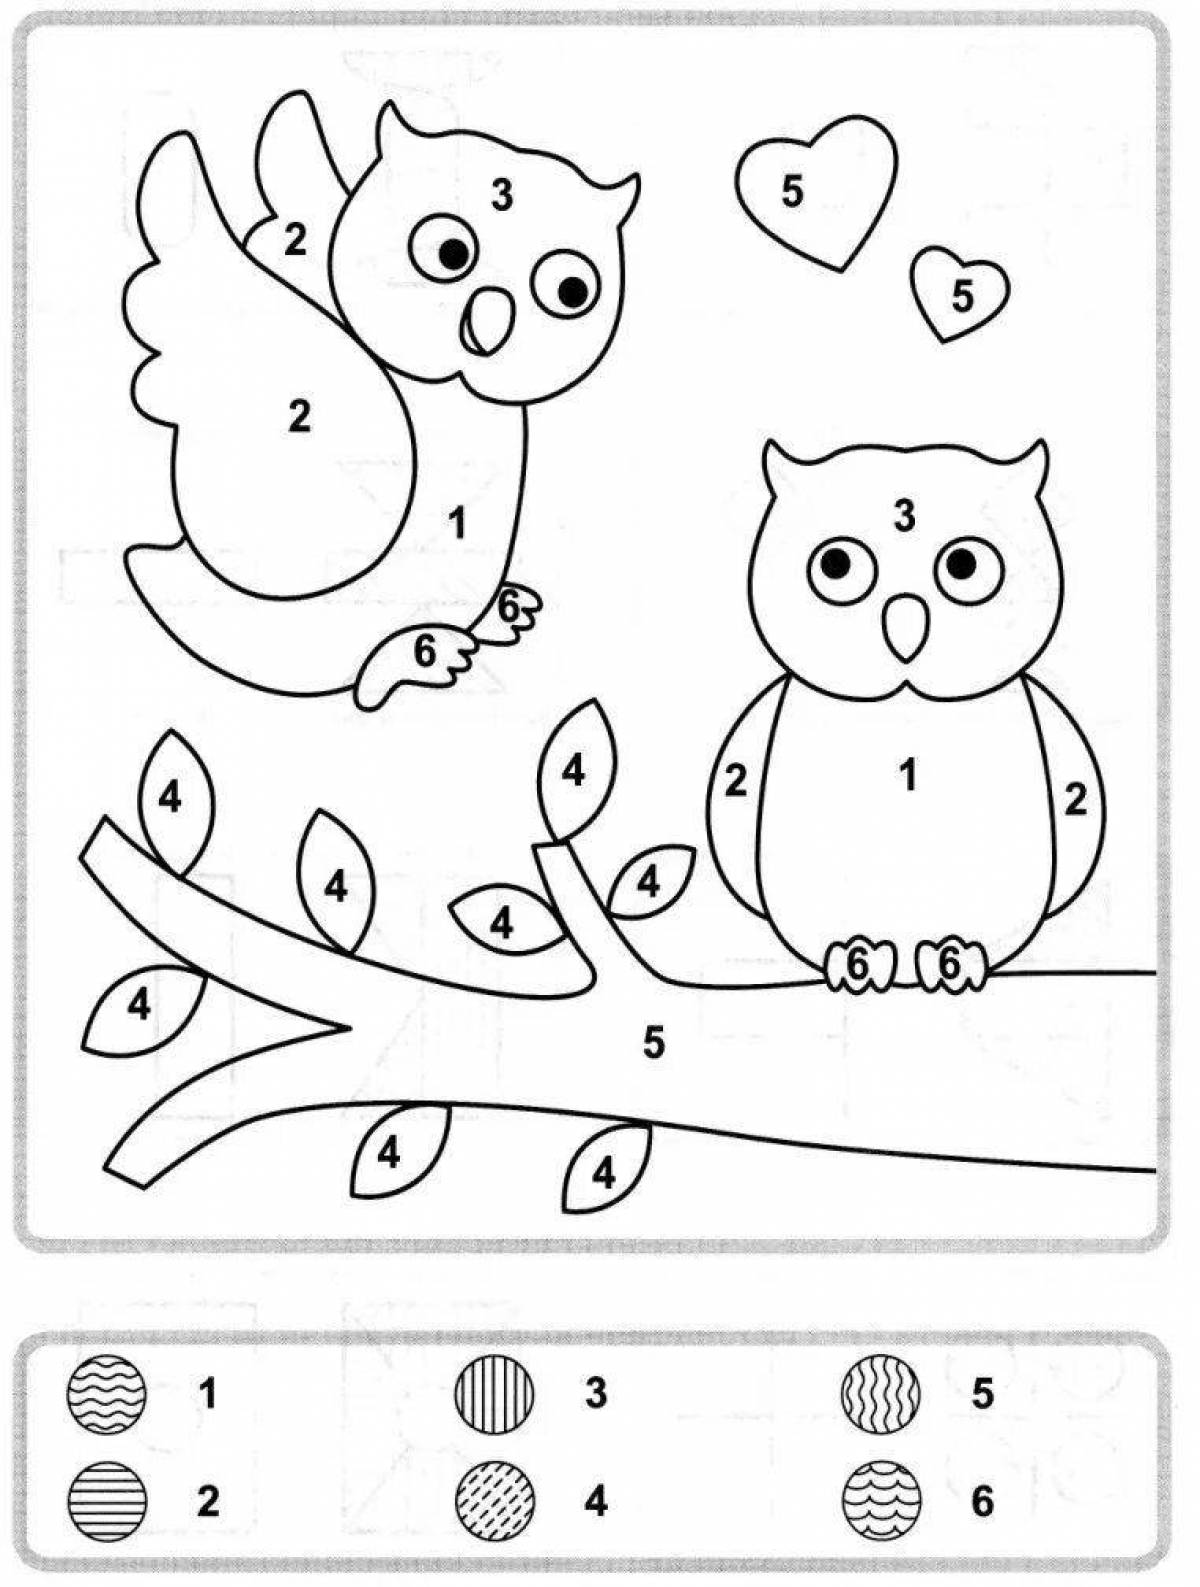 Coloring book for preschoolers getting ready for school